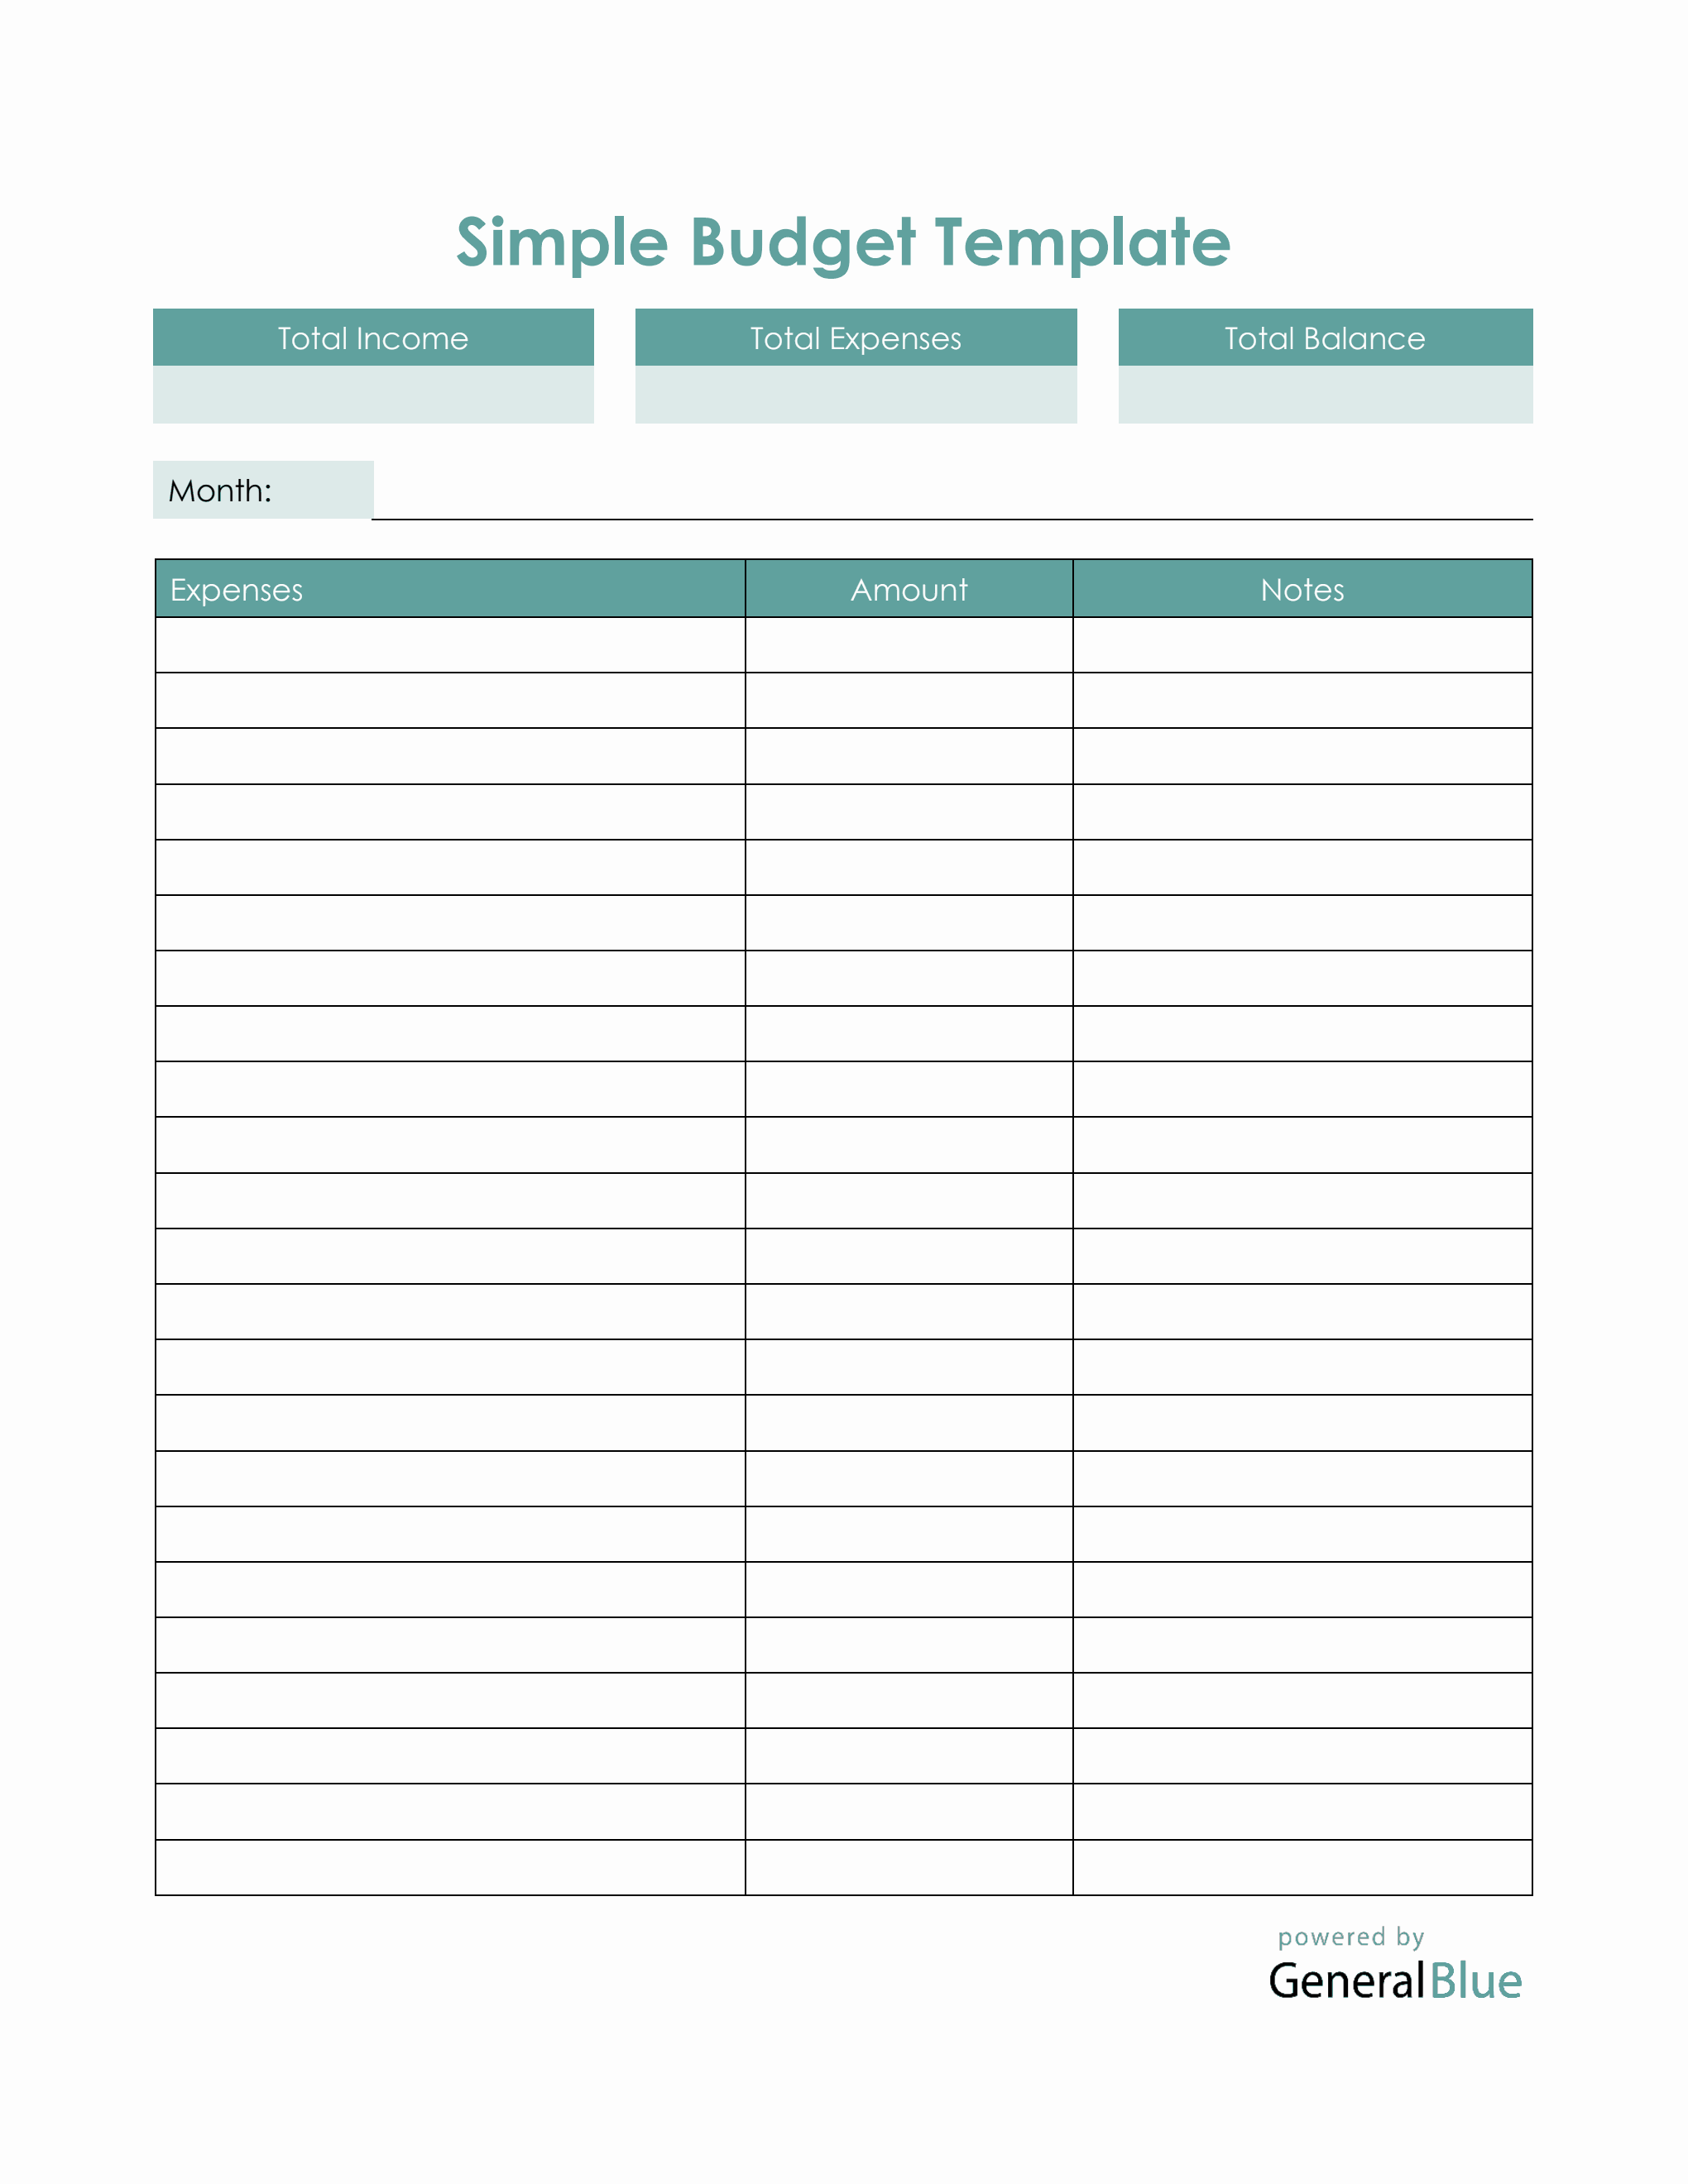 printable-simple-monthly-budget-template